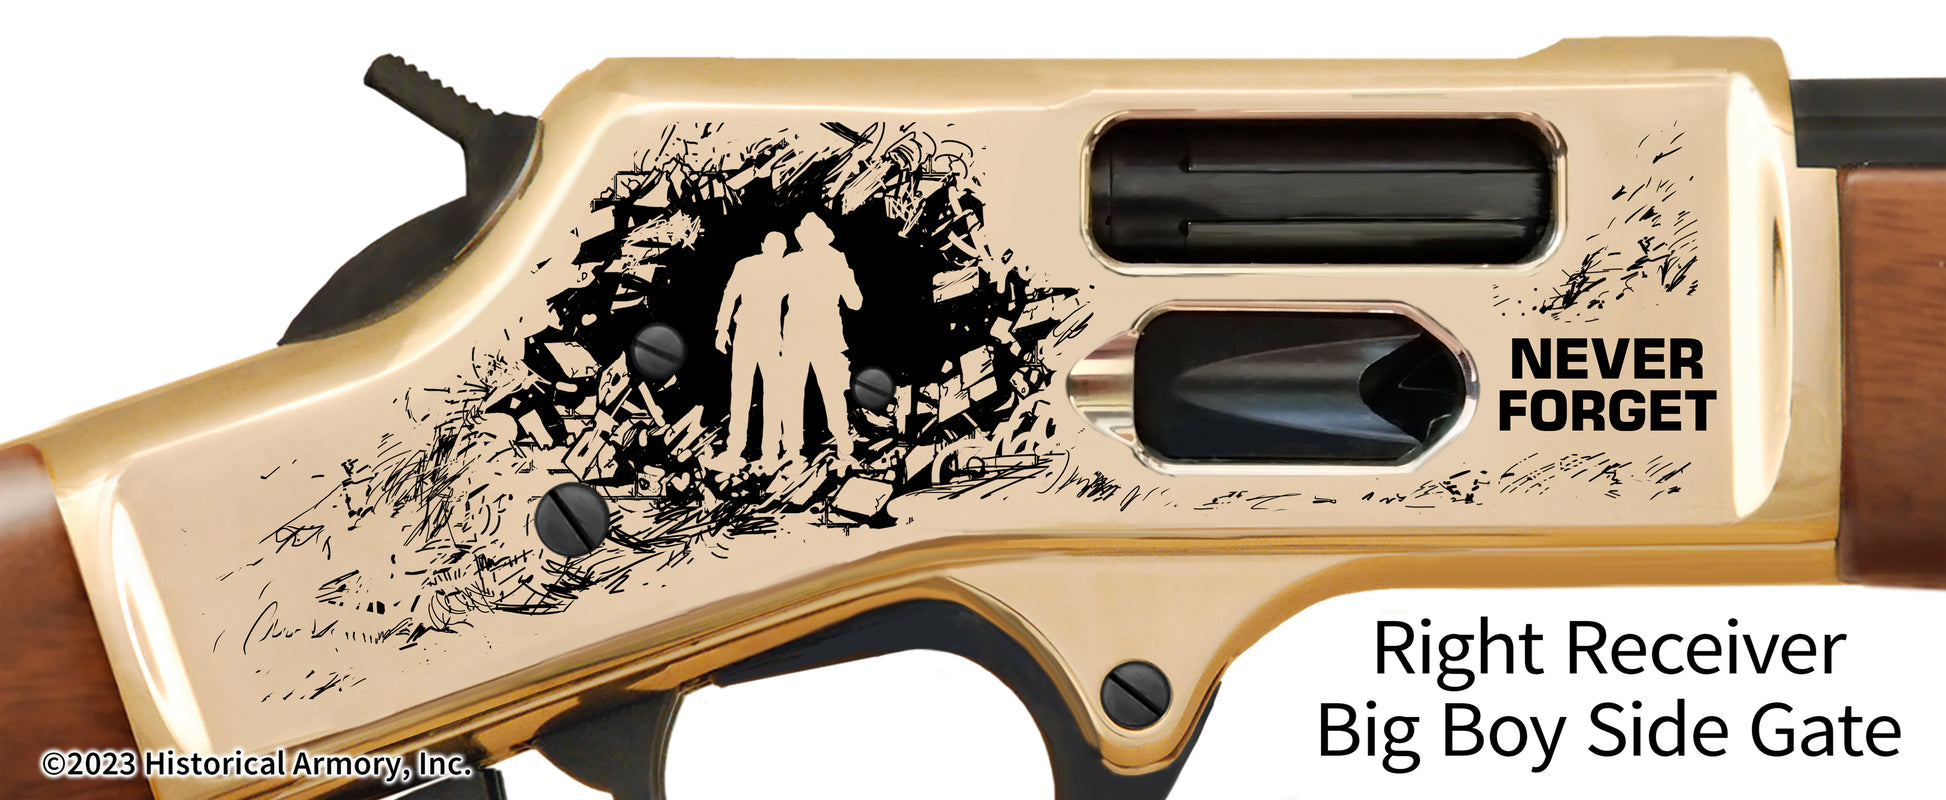 9/11 Firefighter Tribute Engraved Henry Big Boy Rifle